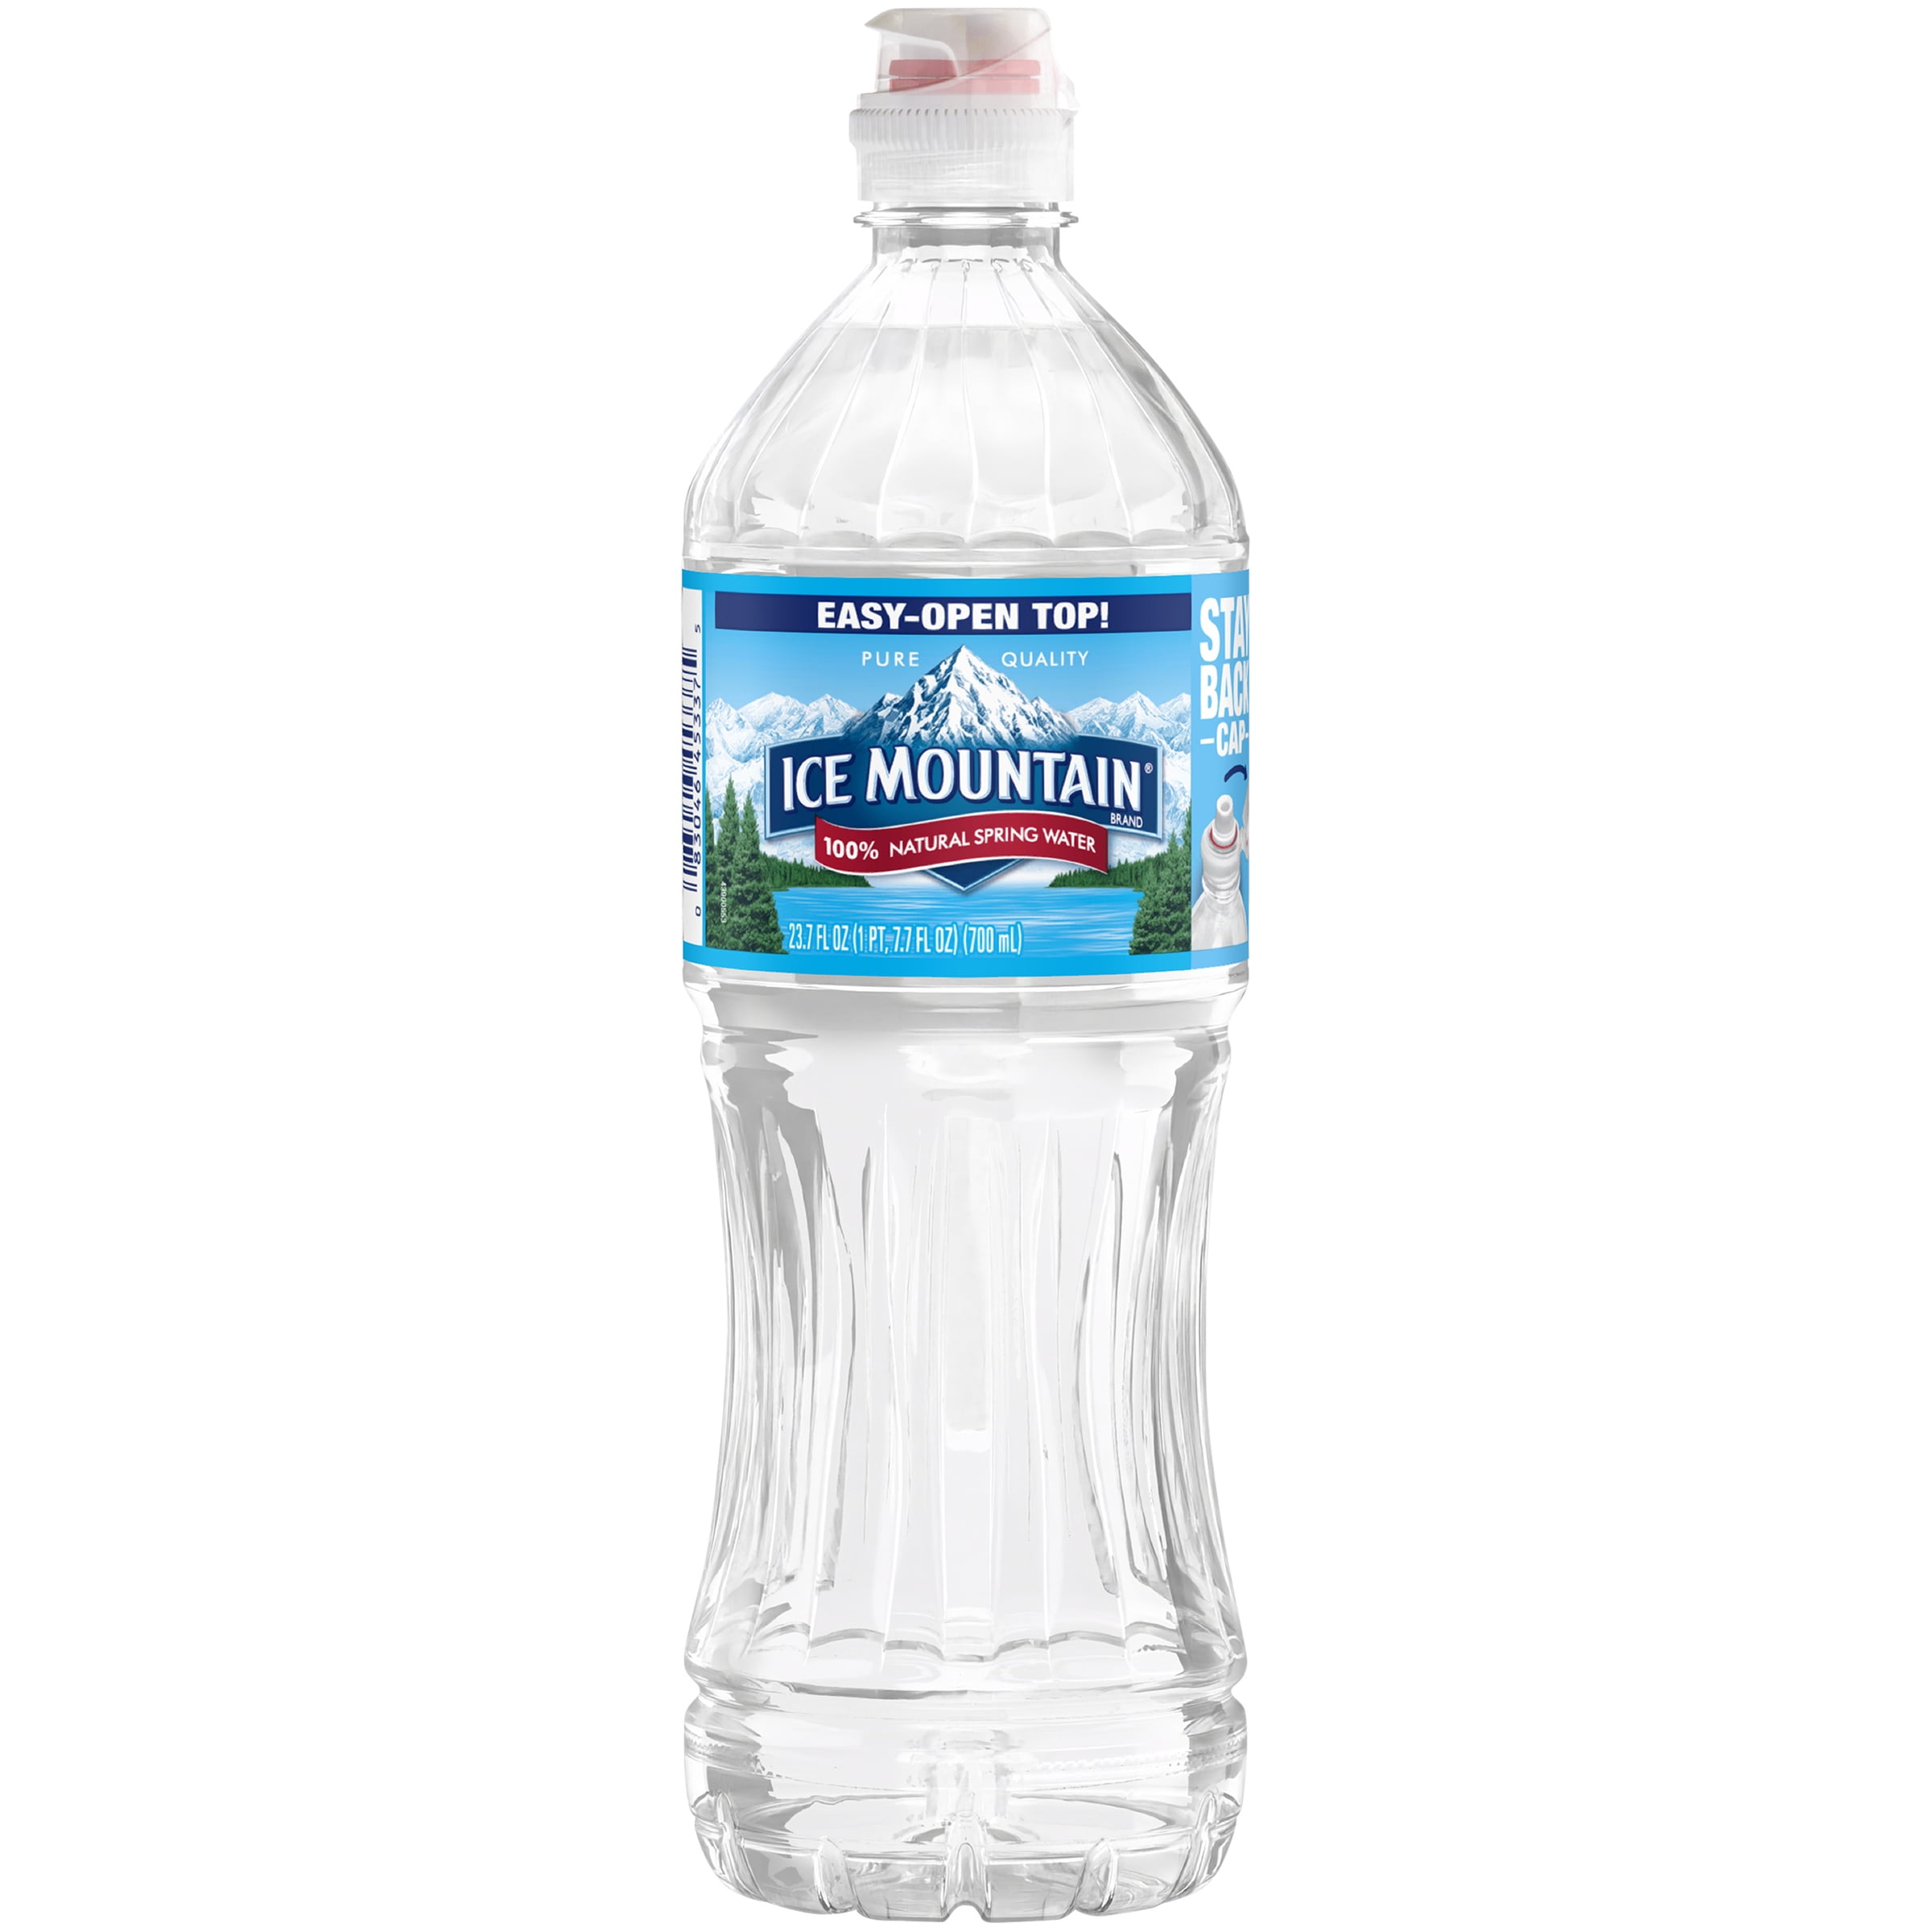 ICE MOUNTAIN Brand 100 Natural Spring Water, 23.7ounce